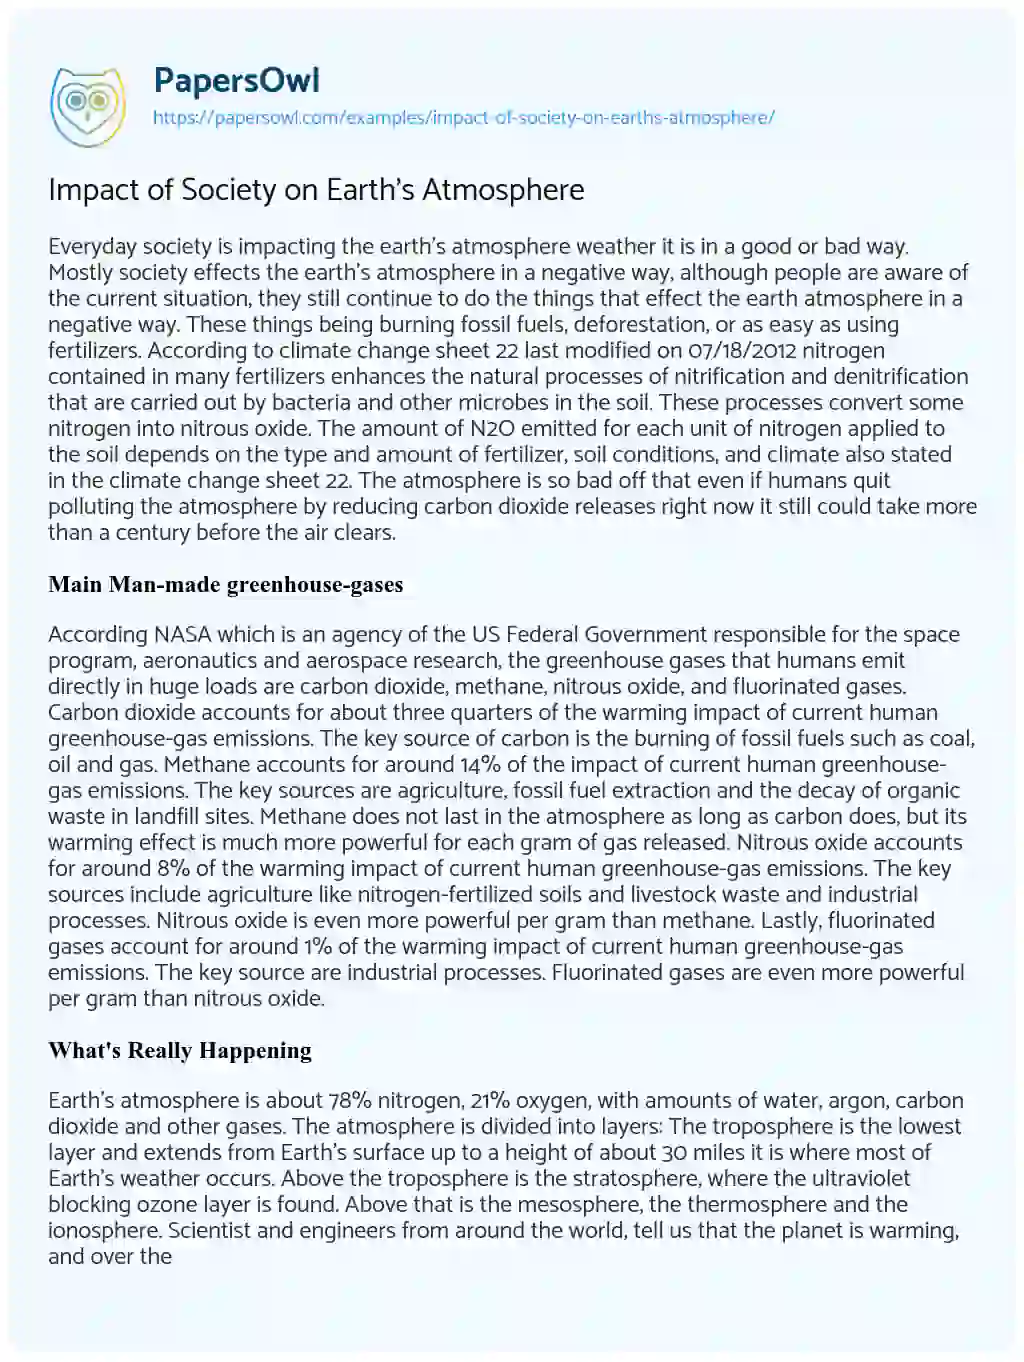 Essay on Impact of Society on Earth’s Atmosphere